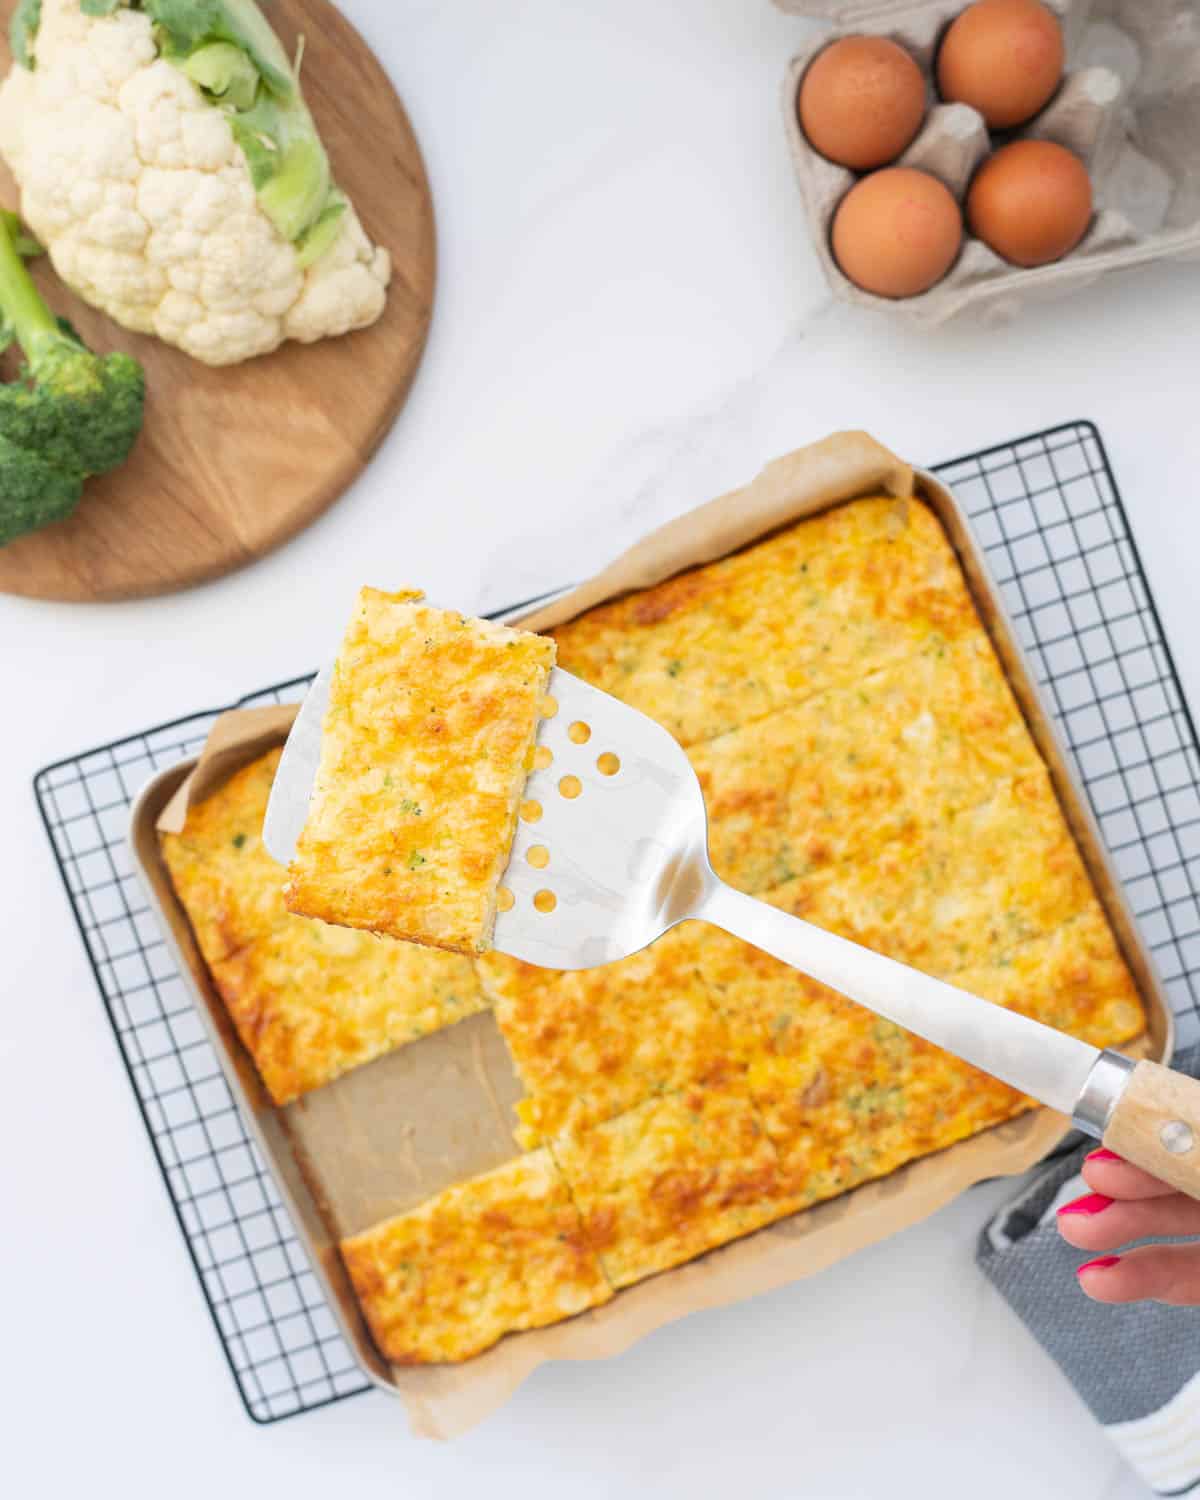 A slice of egg frittata on a stainless steel spatula.